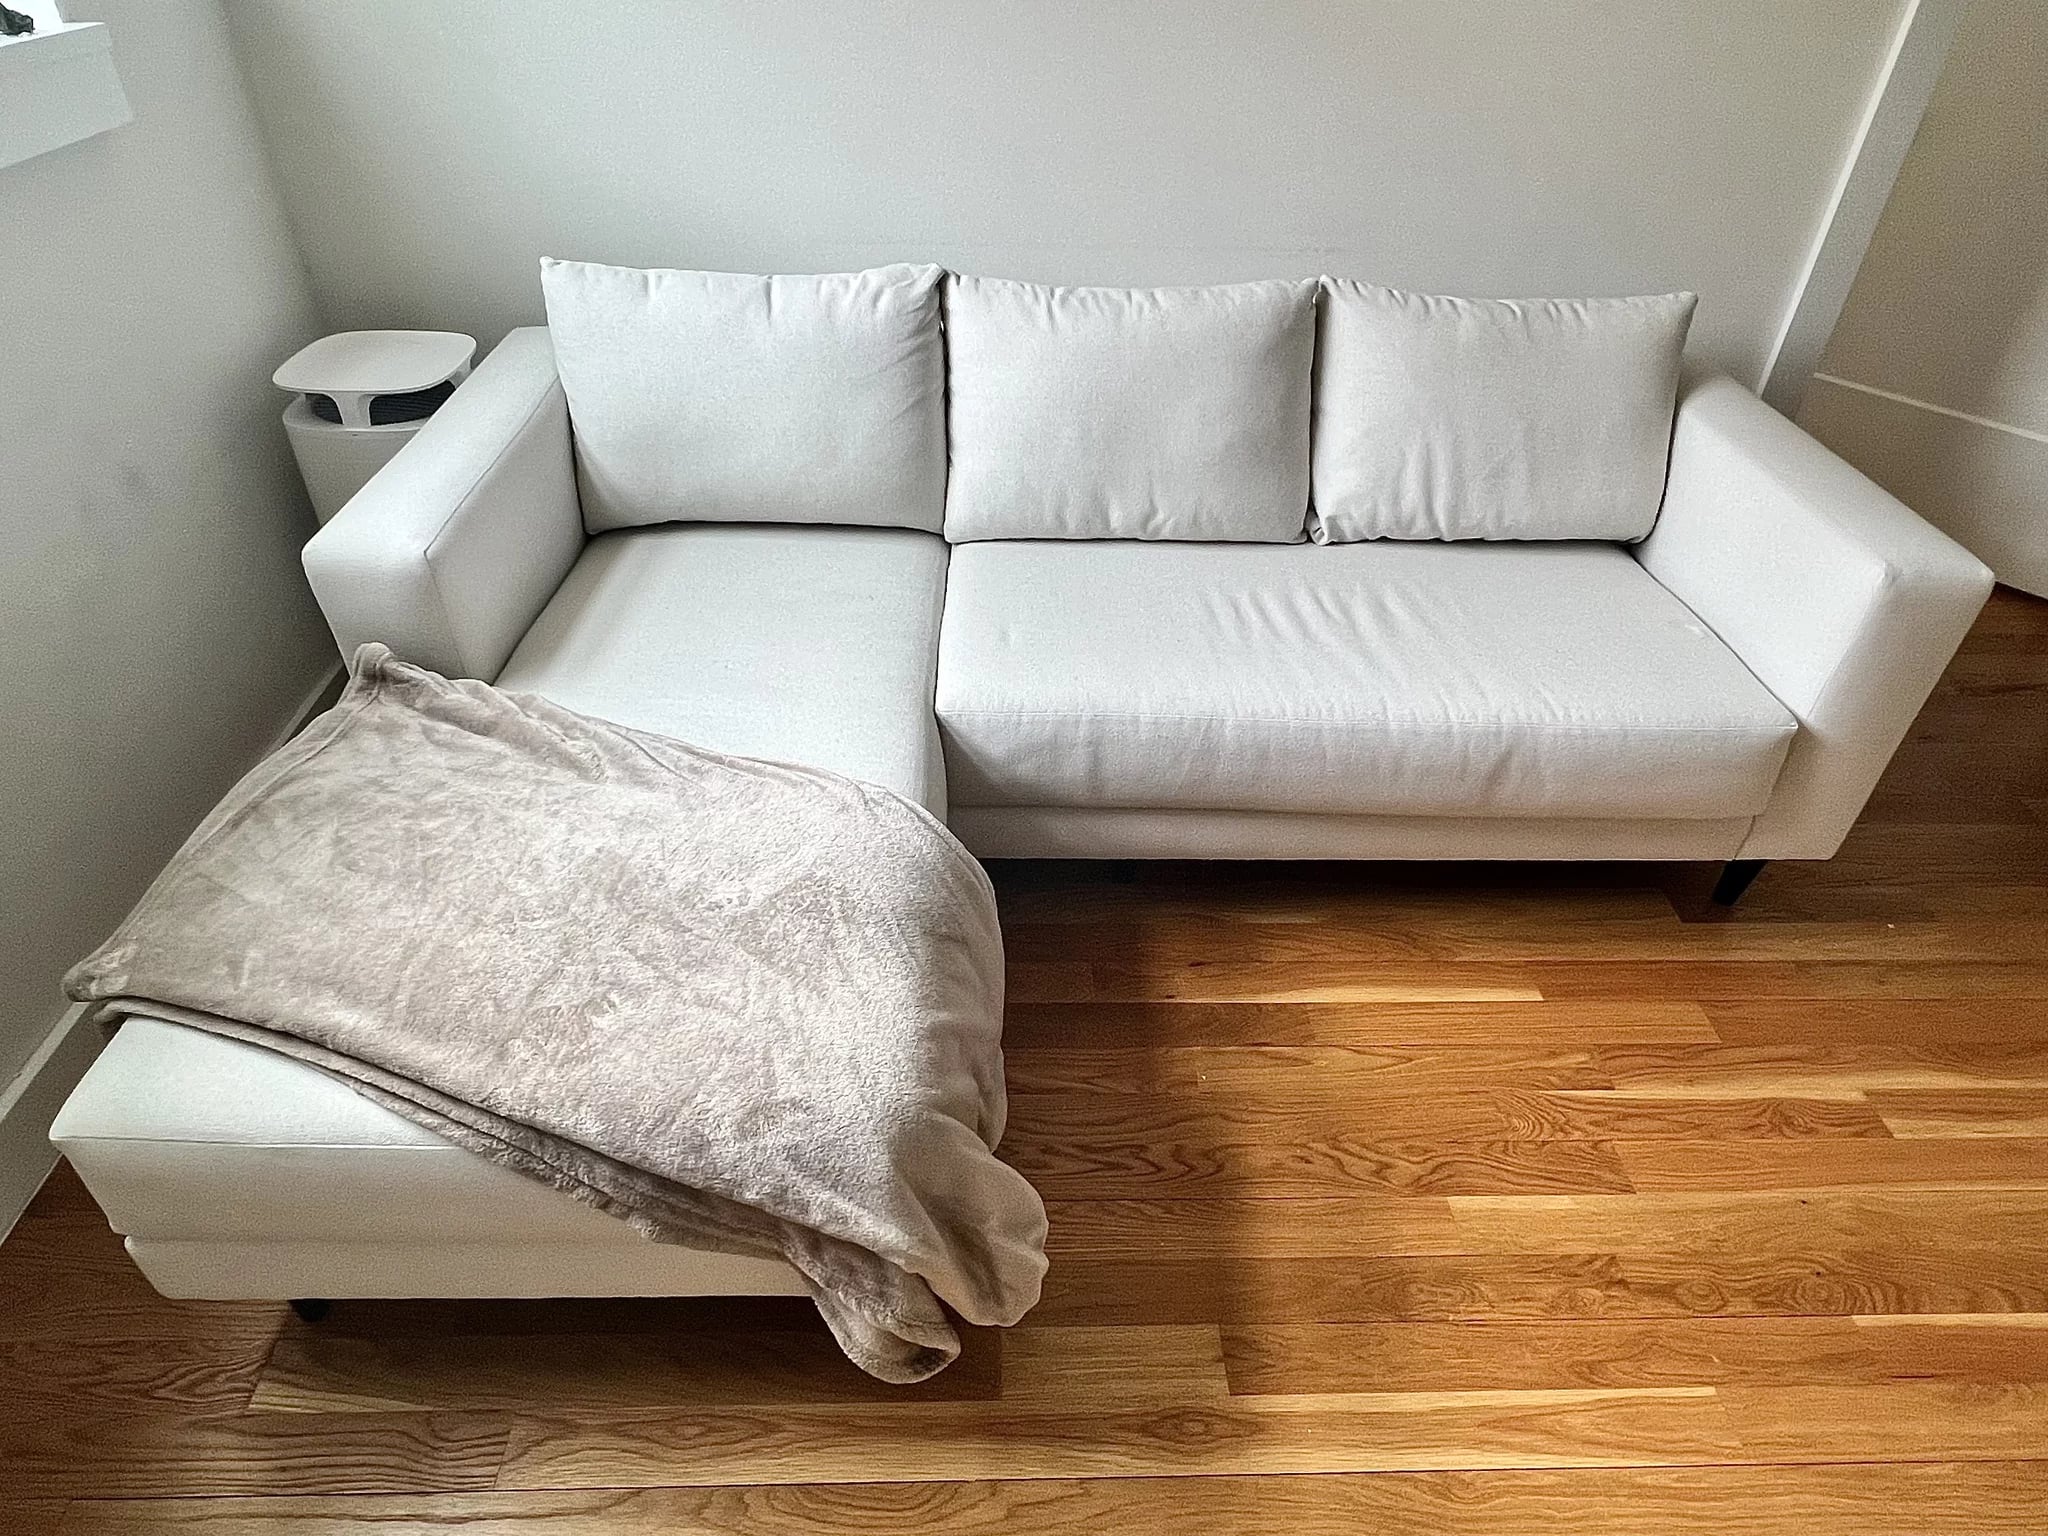 How to Keep A White Sofa Looking (Almost) New, Even With Pets